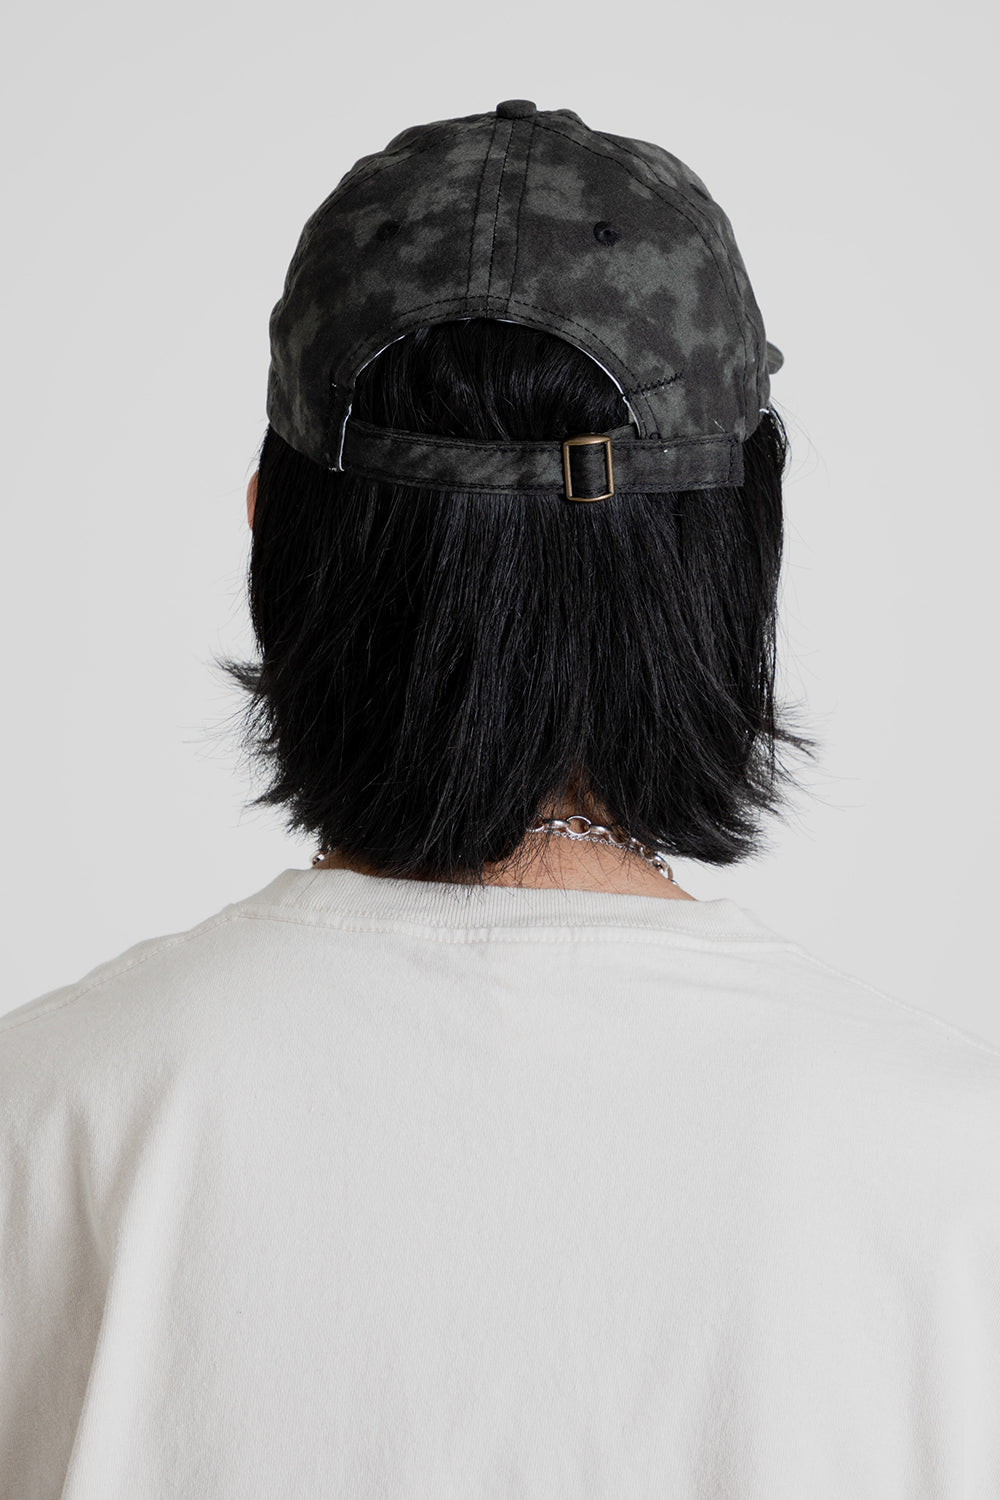 Lite Year Japanese Cotton 6 Panel Cap in Cloudy Black